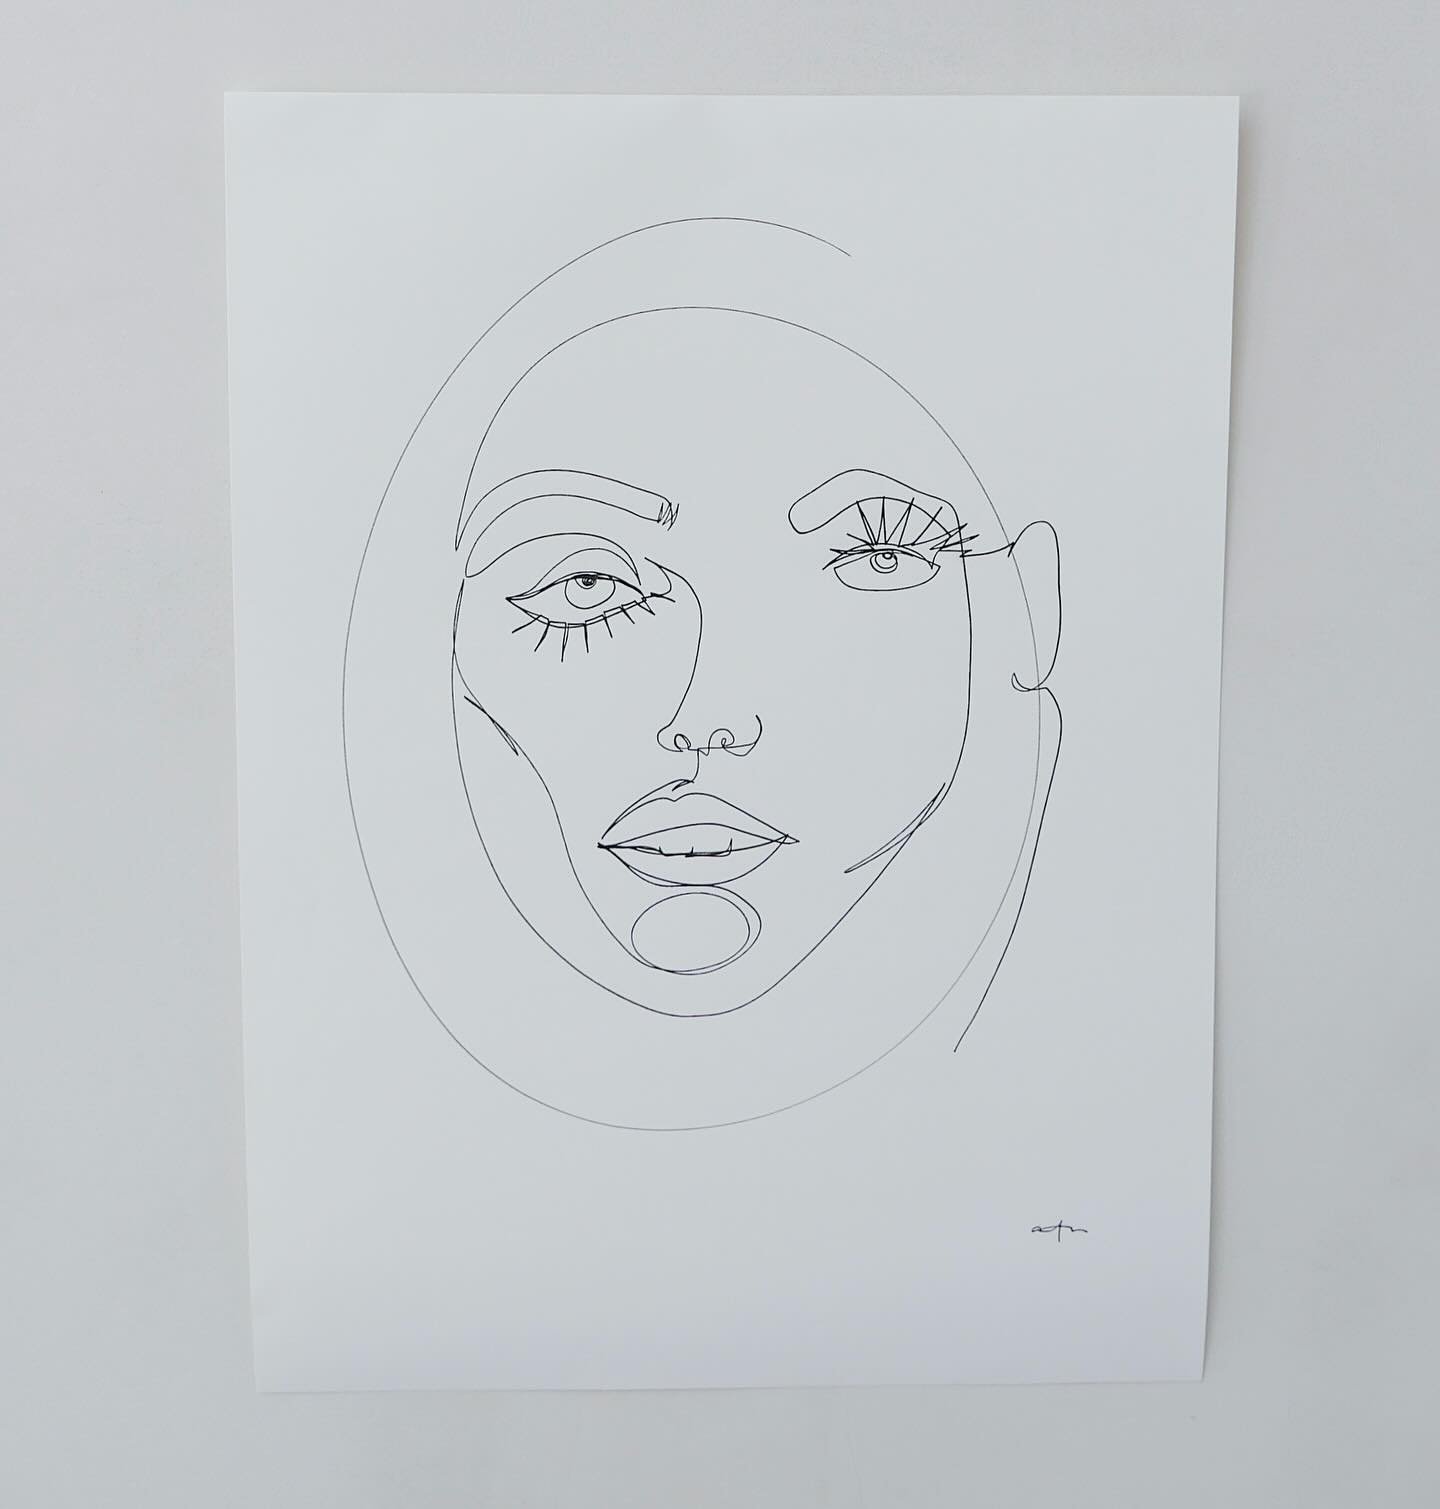 I have a small collection of large line drawings, available on my website now! They are blind contour, continuous lines where I look at a reference image and draw without looking at the paper. They always come out a little wild but that&rsquo;s how I